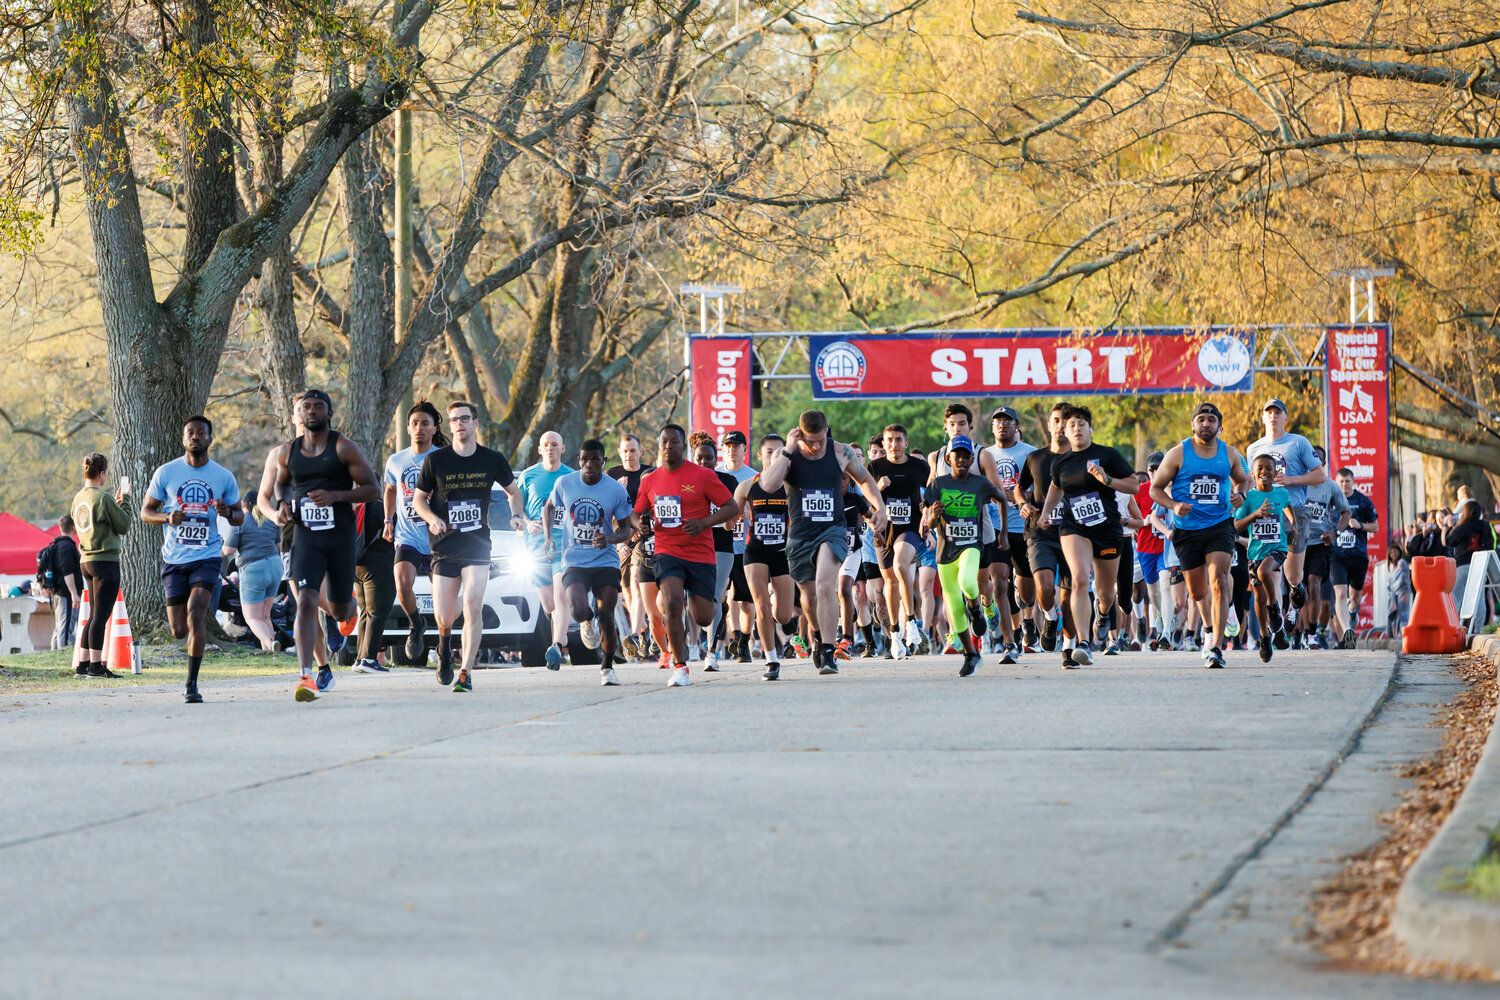 The All American Half Marathon and 5K races returned to an in-person format on Fort Liberty in March 2023.